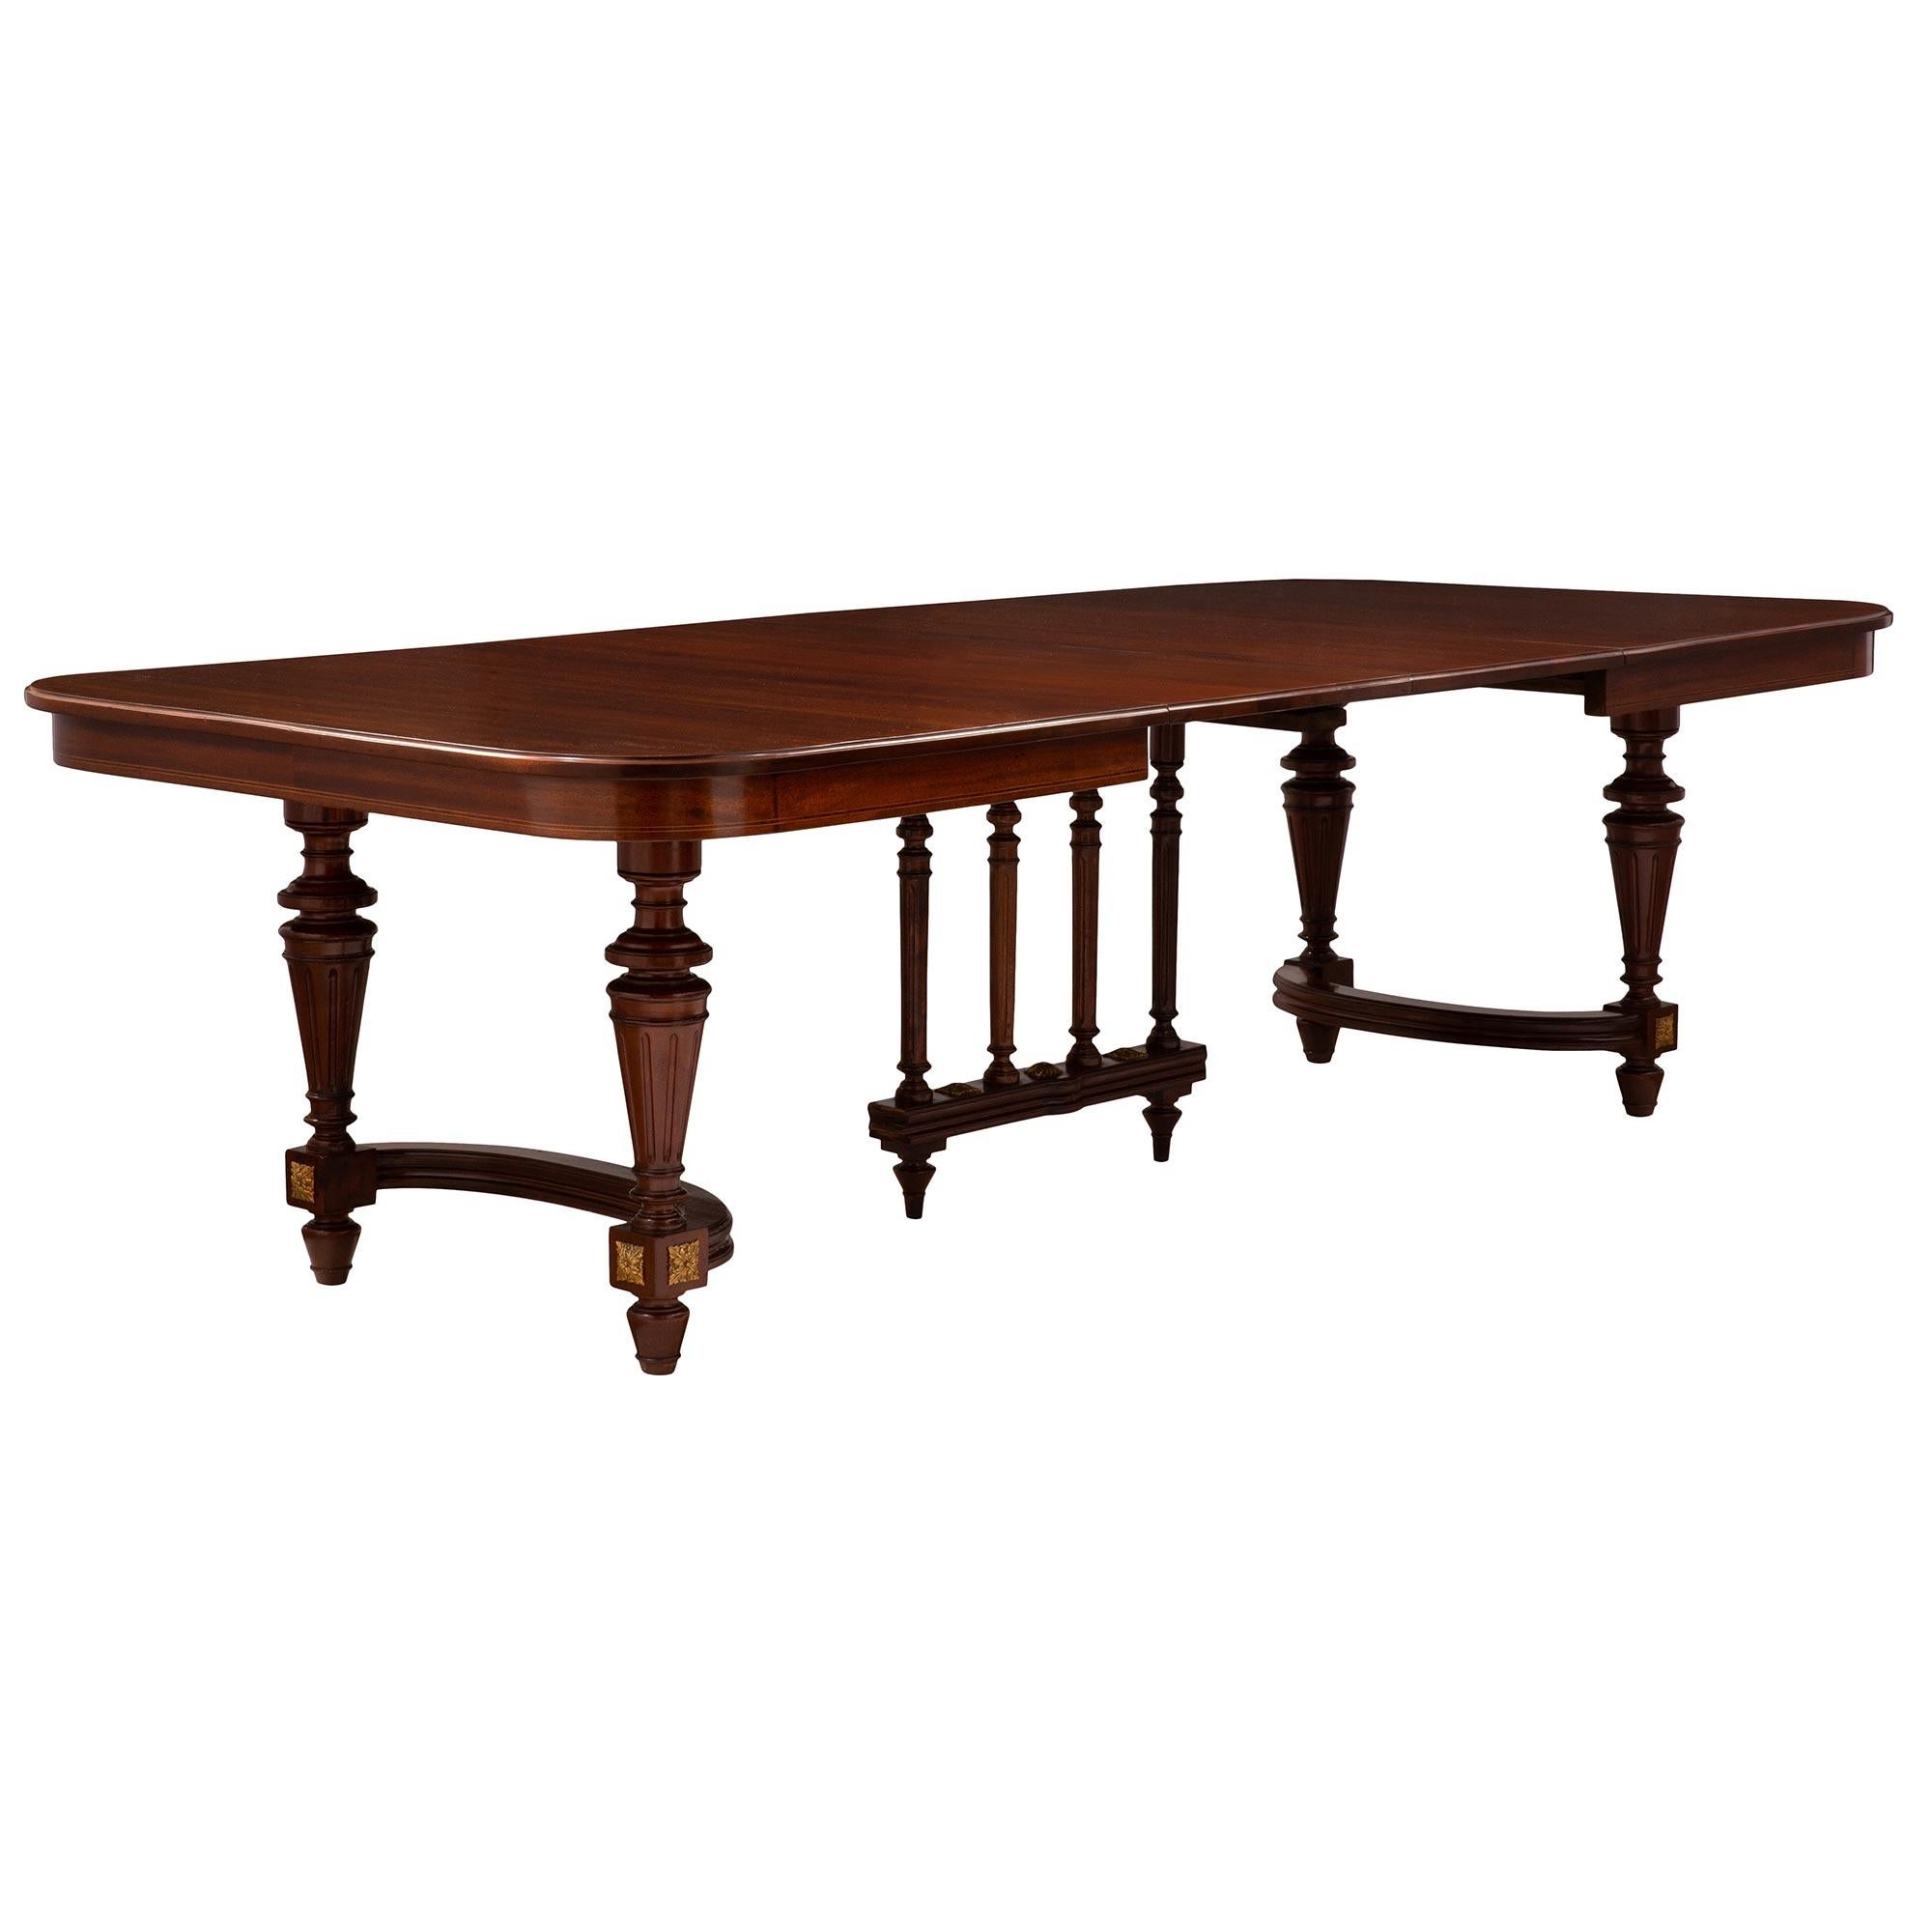 Ormolu French 19th Century Louis XVI Style Mahogany Dining Table with Two Extensions For Sale